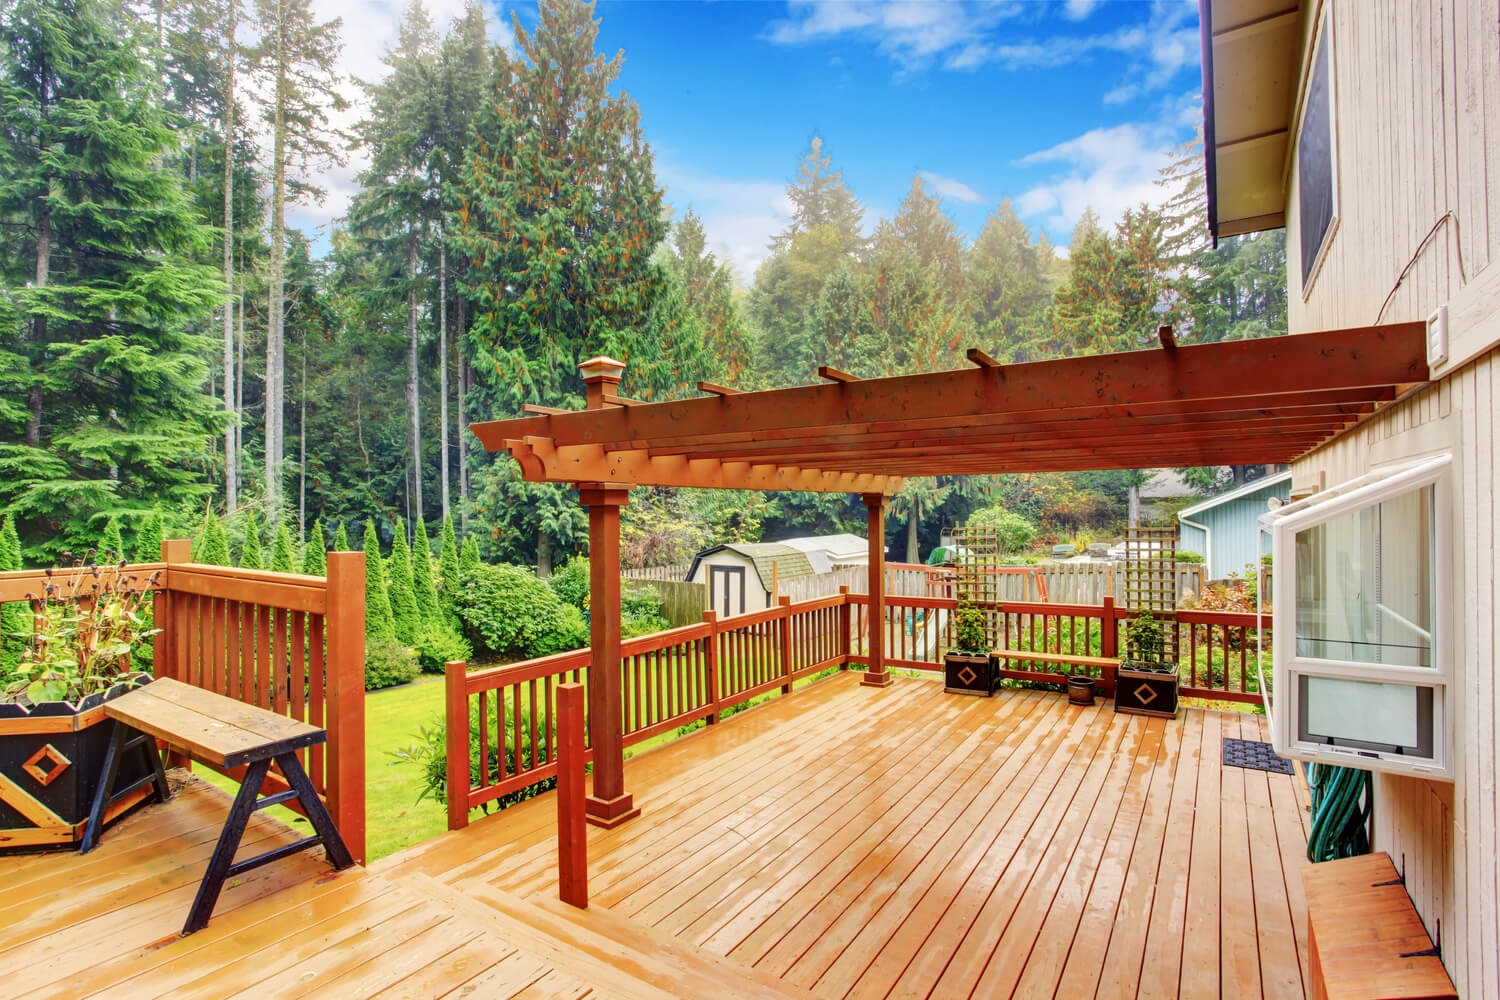 What You Need to know when Building your Porch